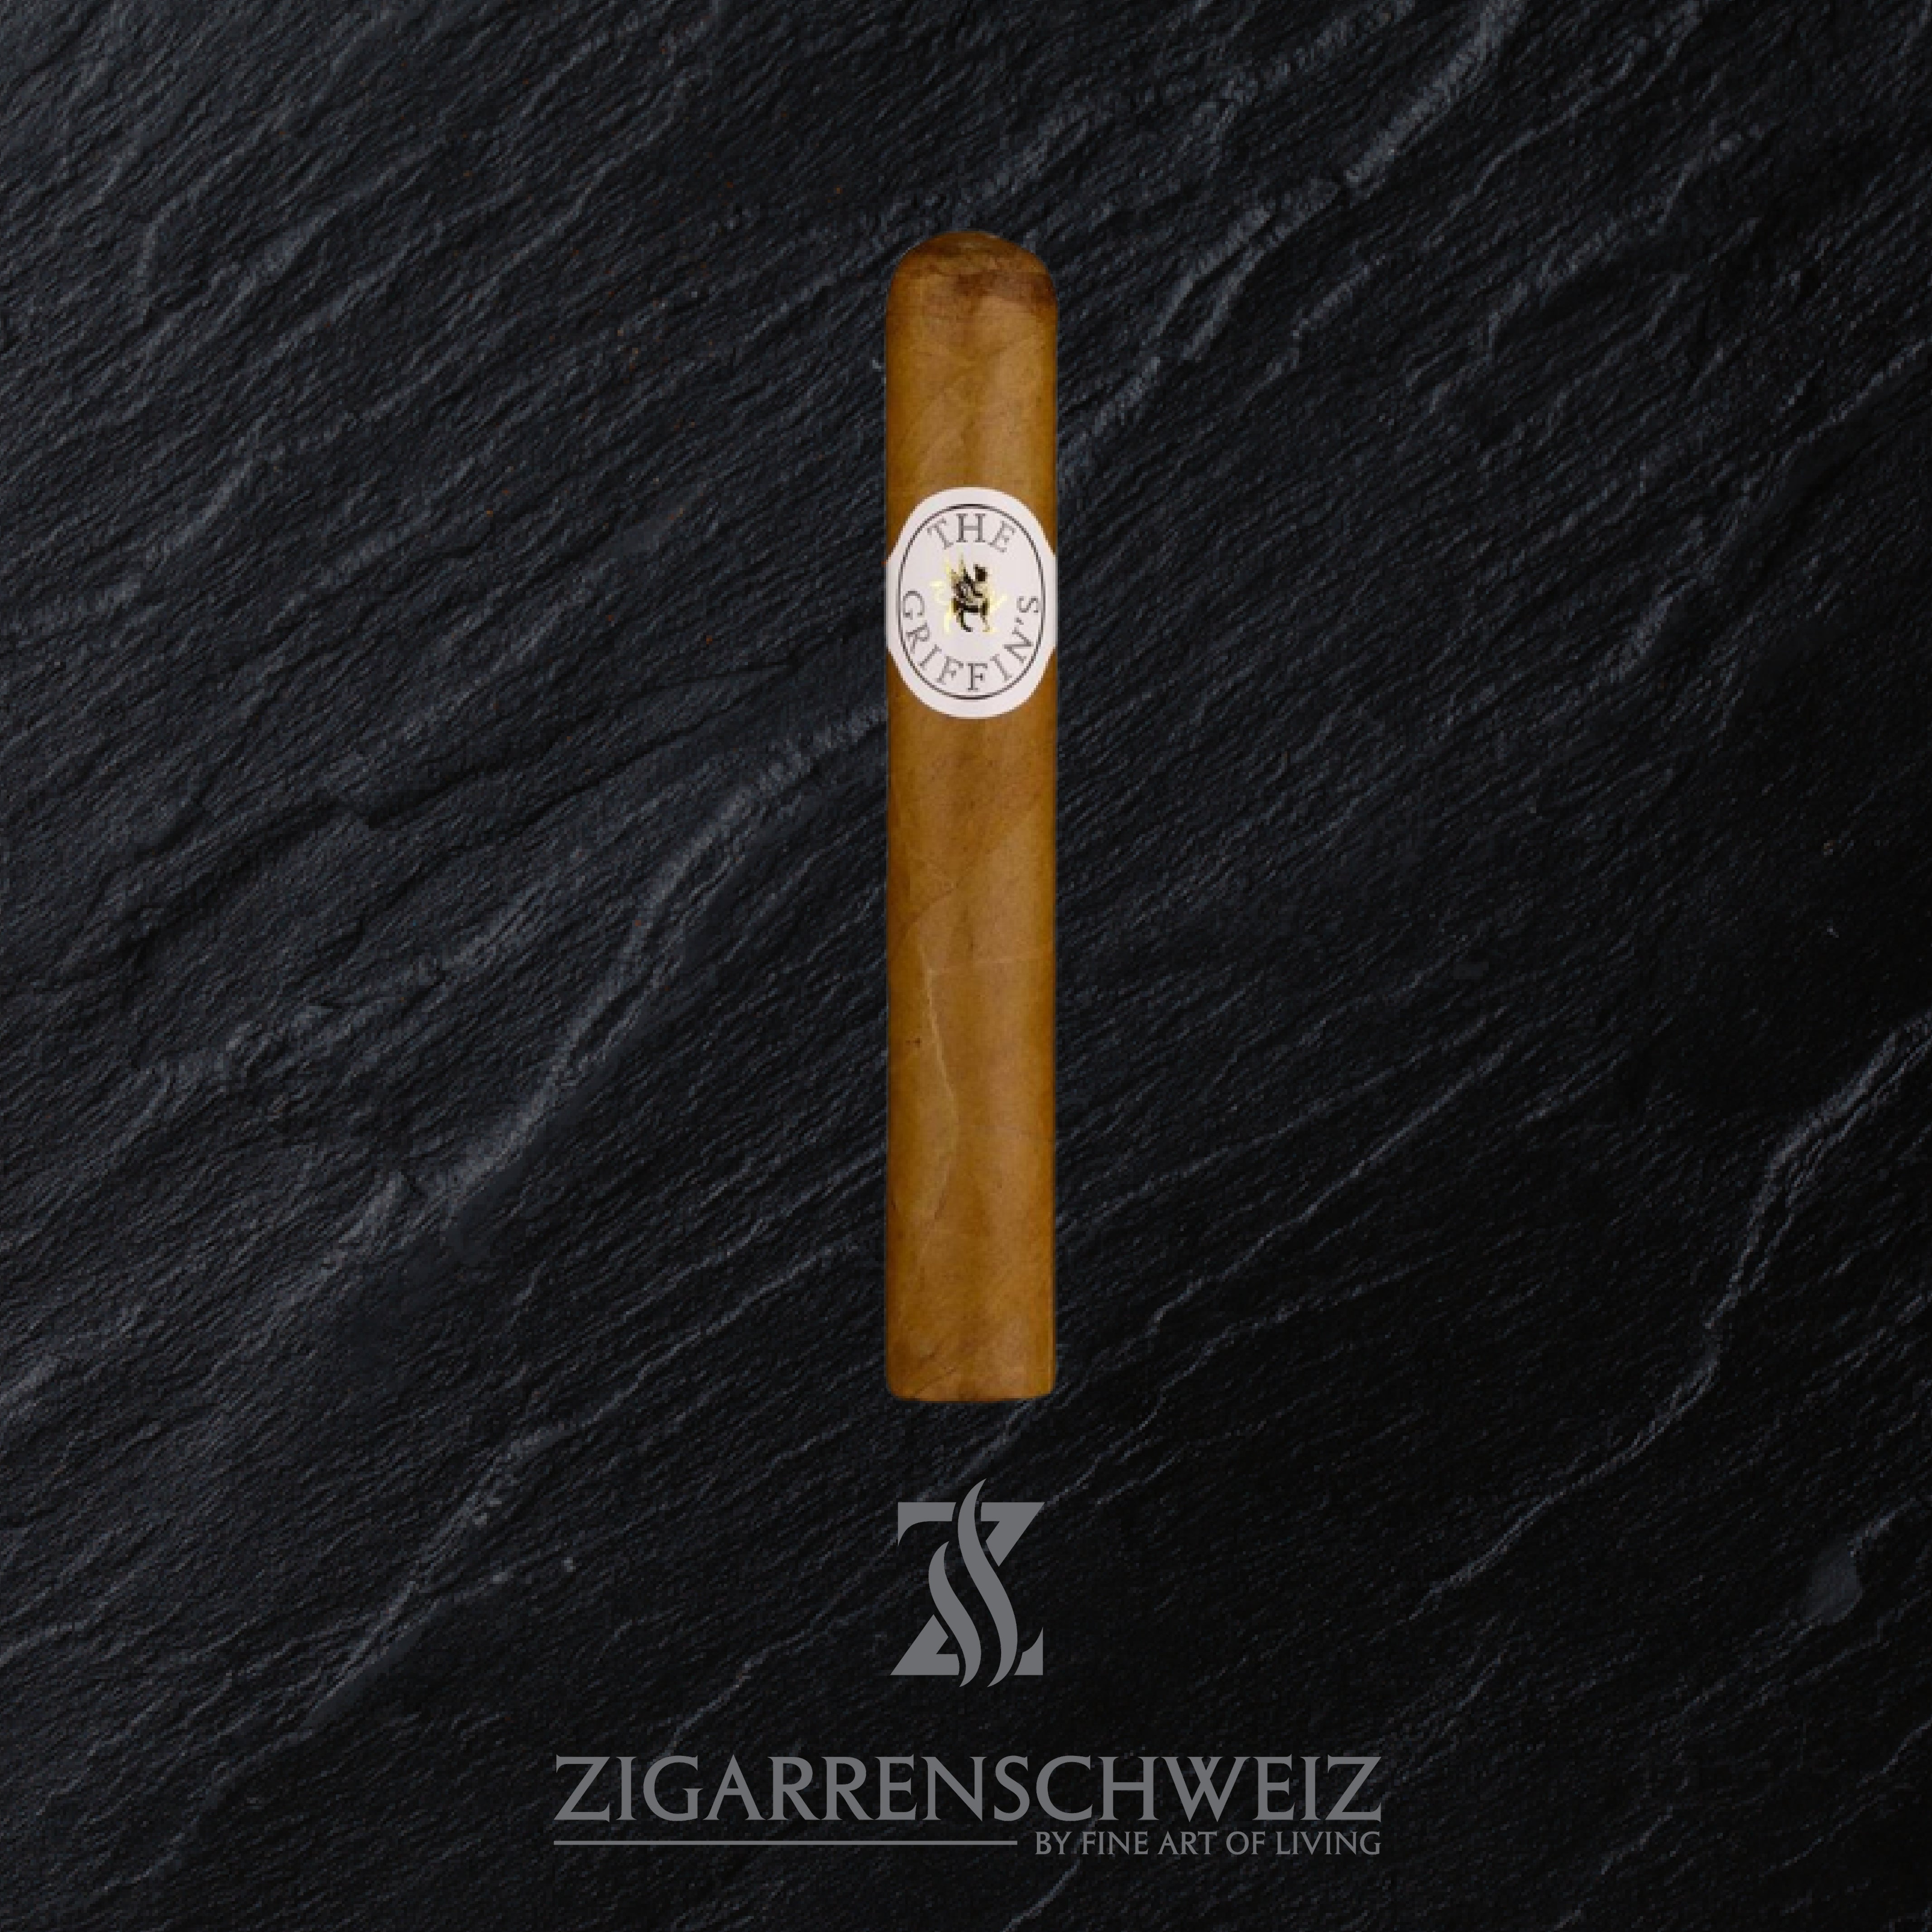 The Griffins Classic Gran Robusto Zigarre